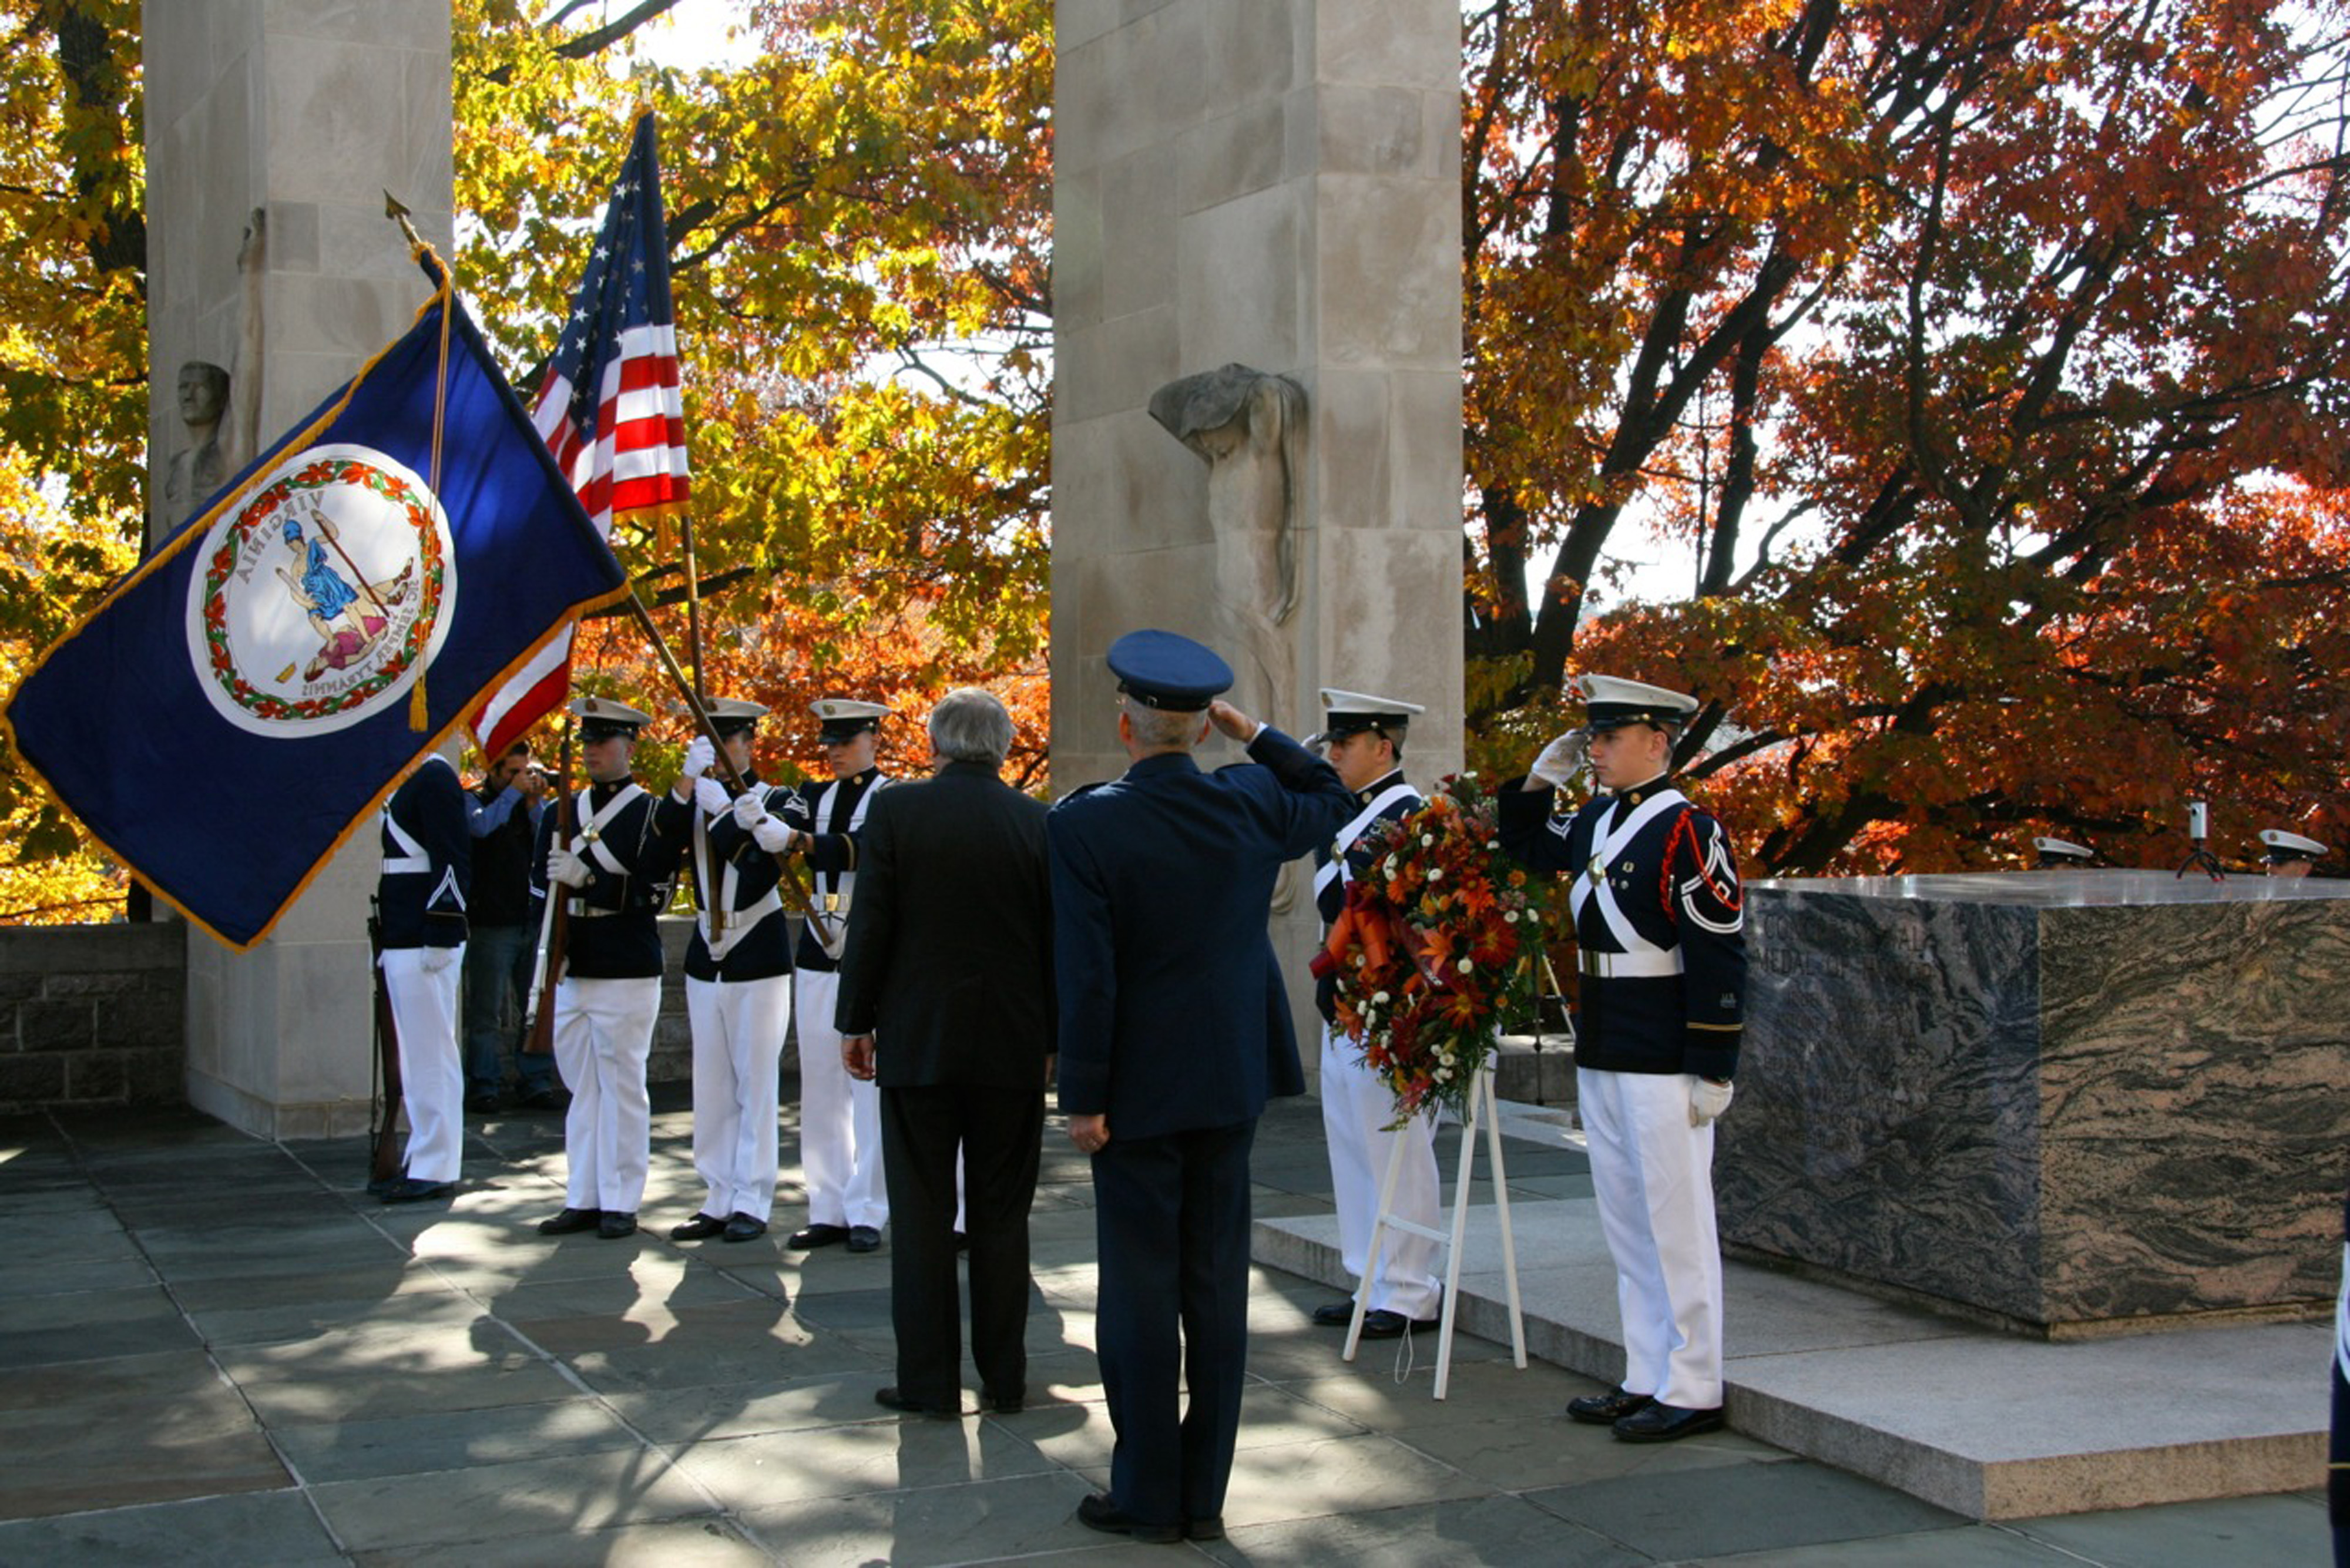 The Virginia Tech Corps of Cadets Veterans Day Ceremony at the War Memorial in 2010